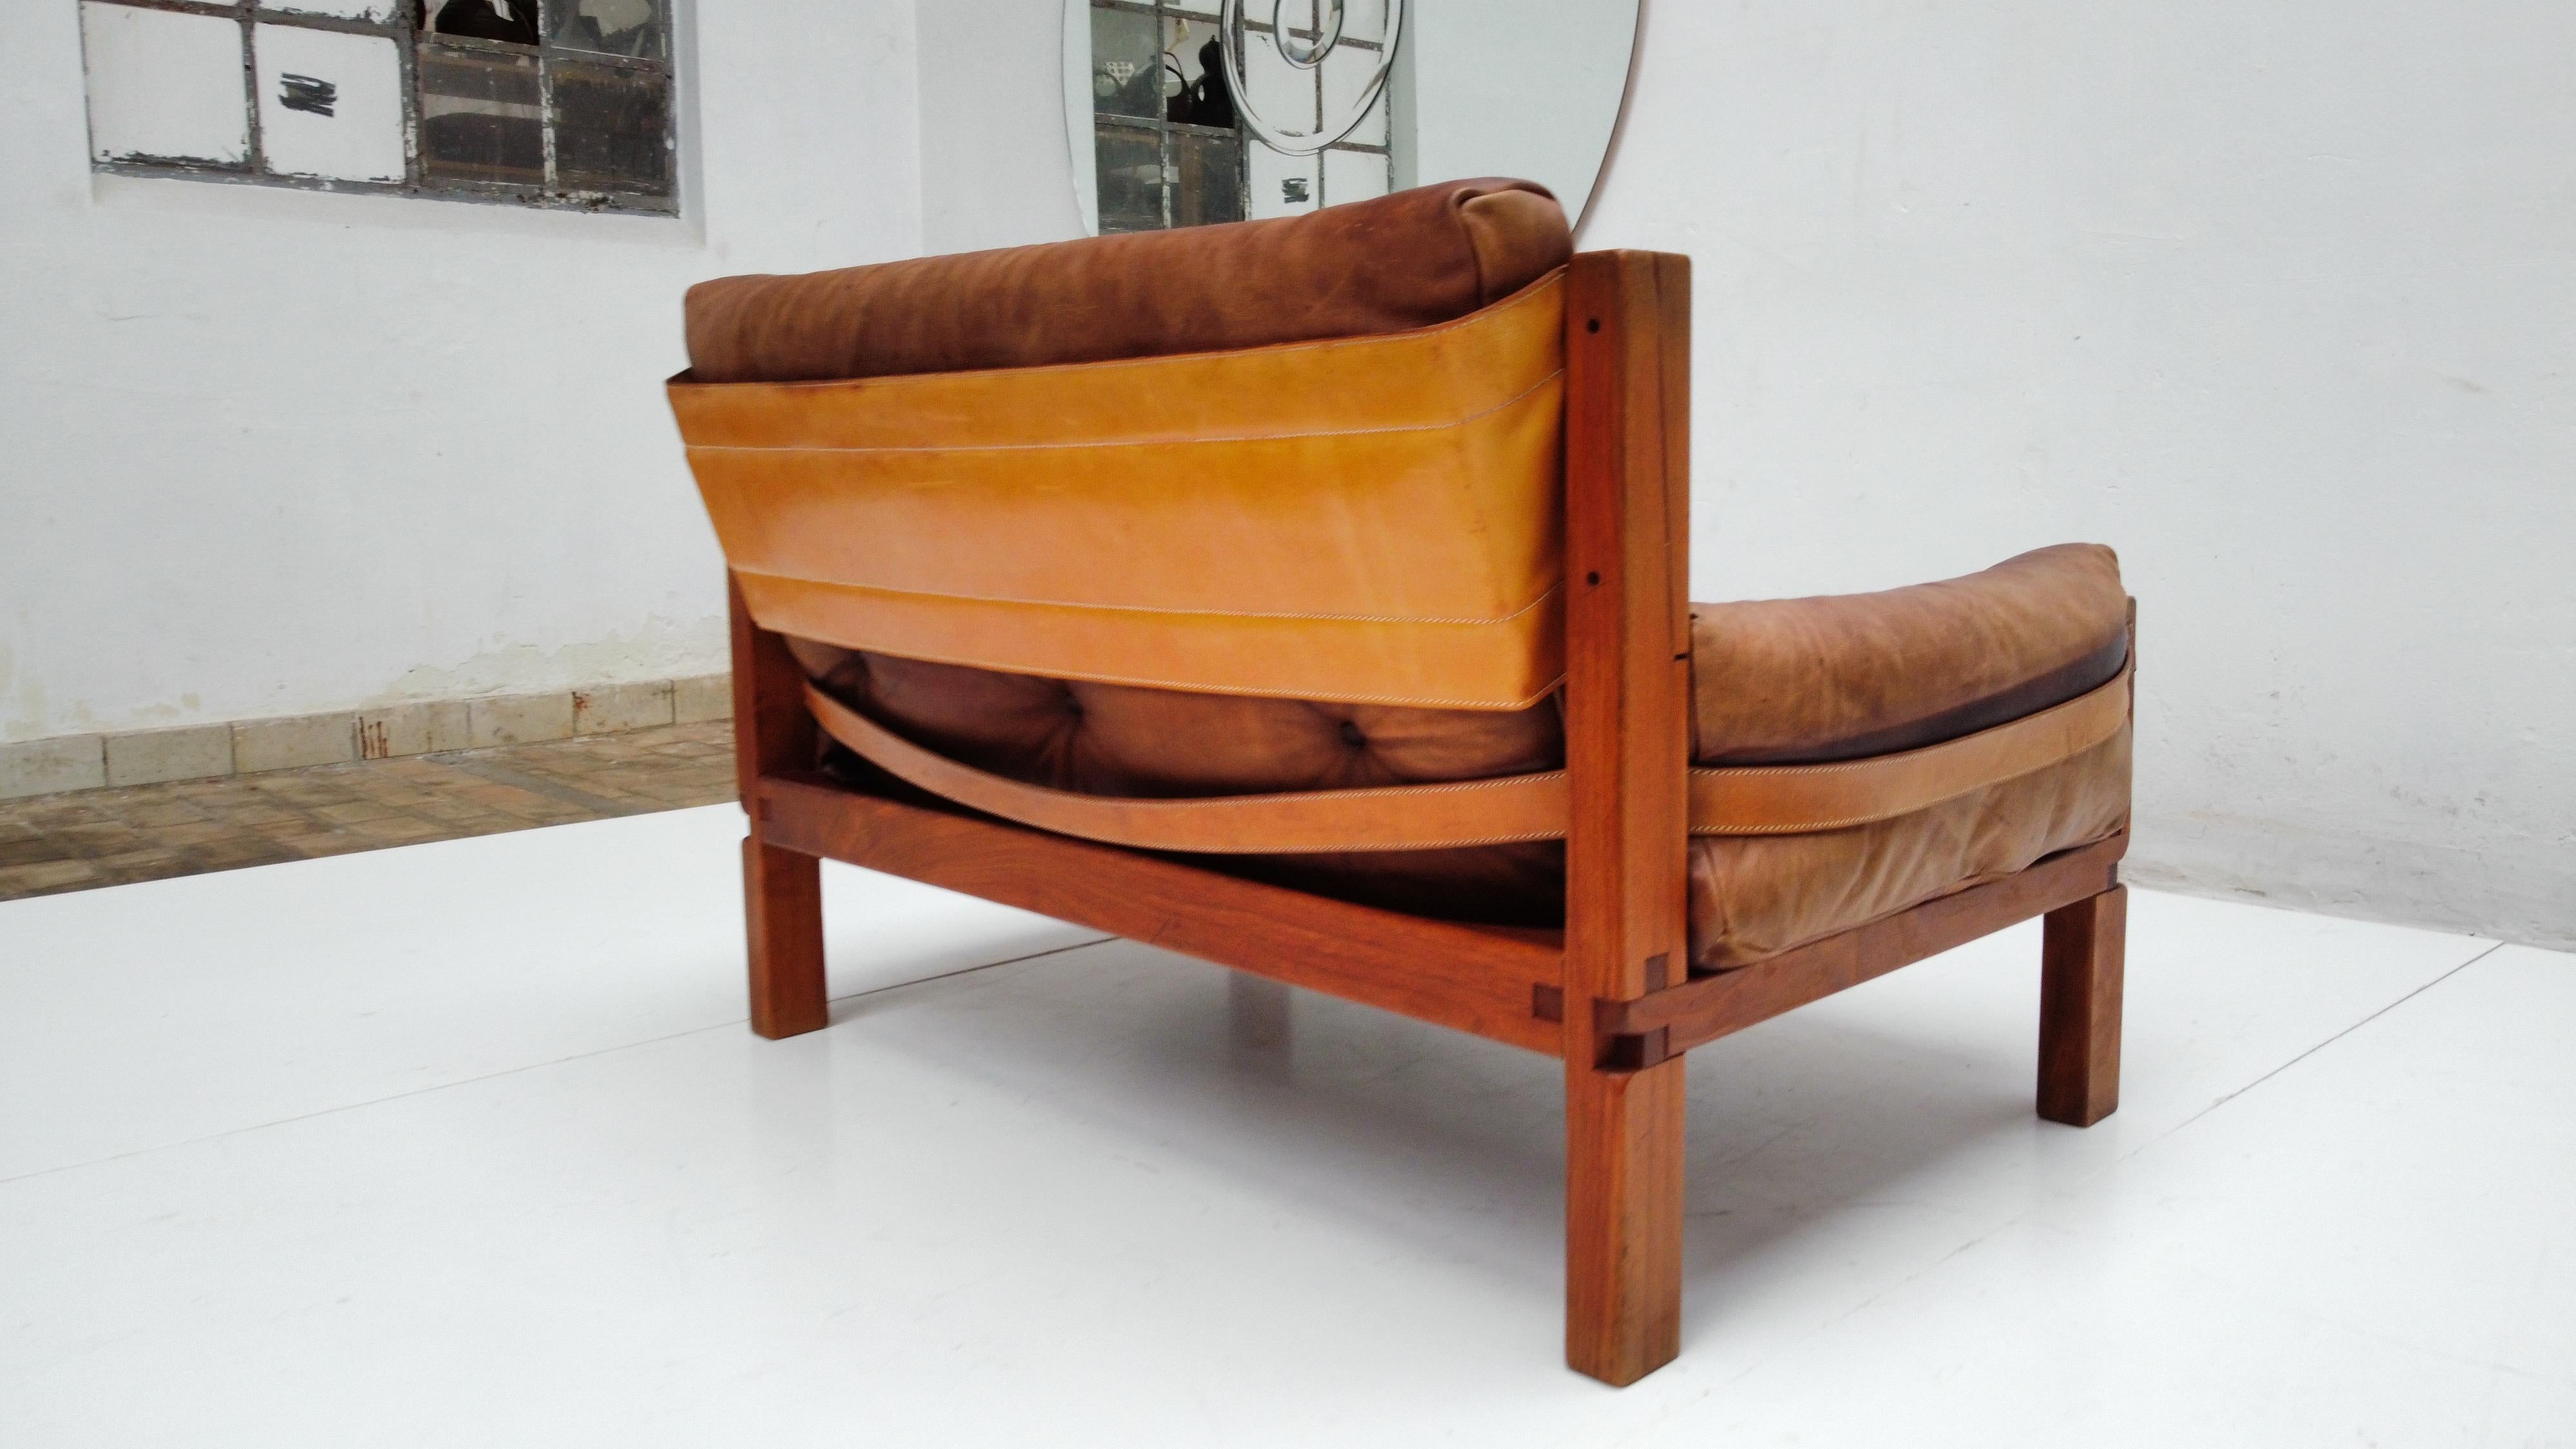 S18 Loveseat by Pierre Chapo circa 1970

New webbing 
Original leather with a beautiful old user patina that has been cleaned and polished 
The cushion interiors have been filled with a new Latex and Dacron filling fiber 

Lovely authentic